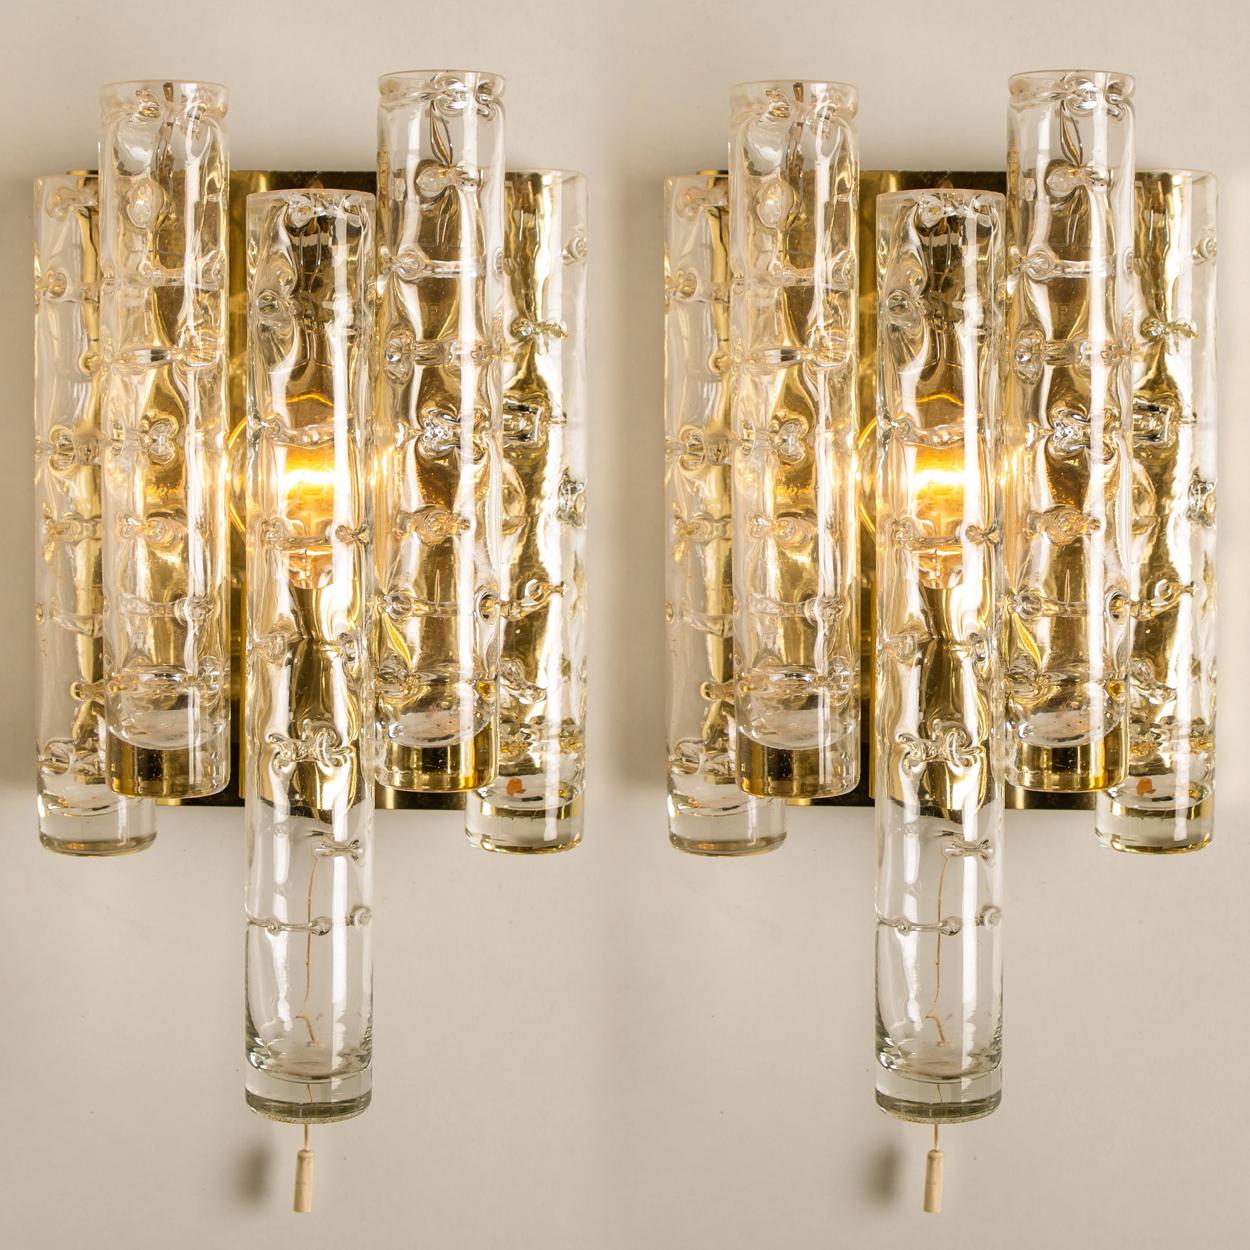 Wonderful pair off high-end Doria wall lamps. Manufactured in the 1960s.
The stylish elegance of this lamp suits many environments, from midcentury to Hollywood Regency, from Danish modern to Space Age and contemporary interior.

Brass structure